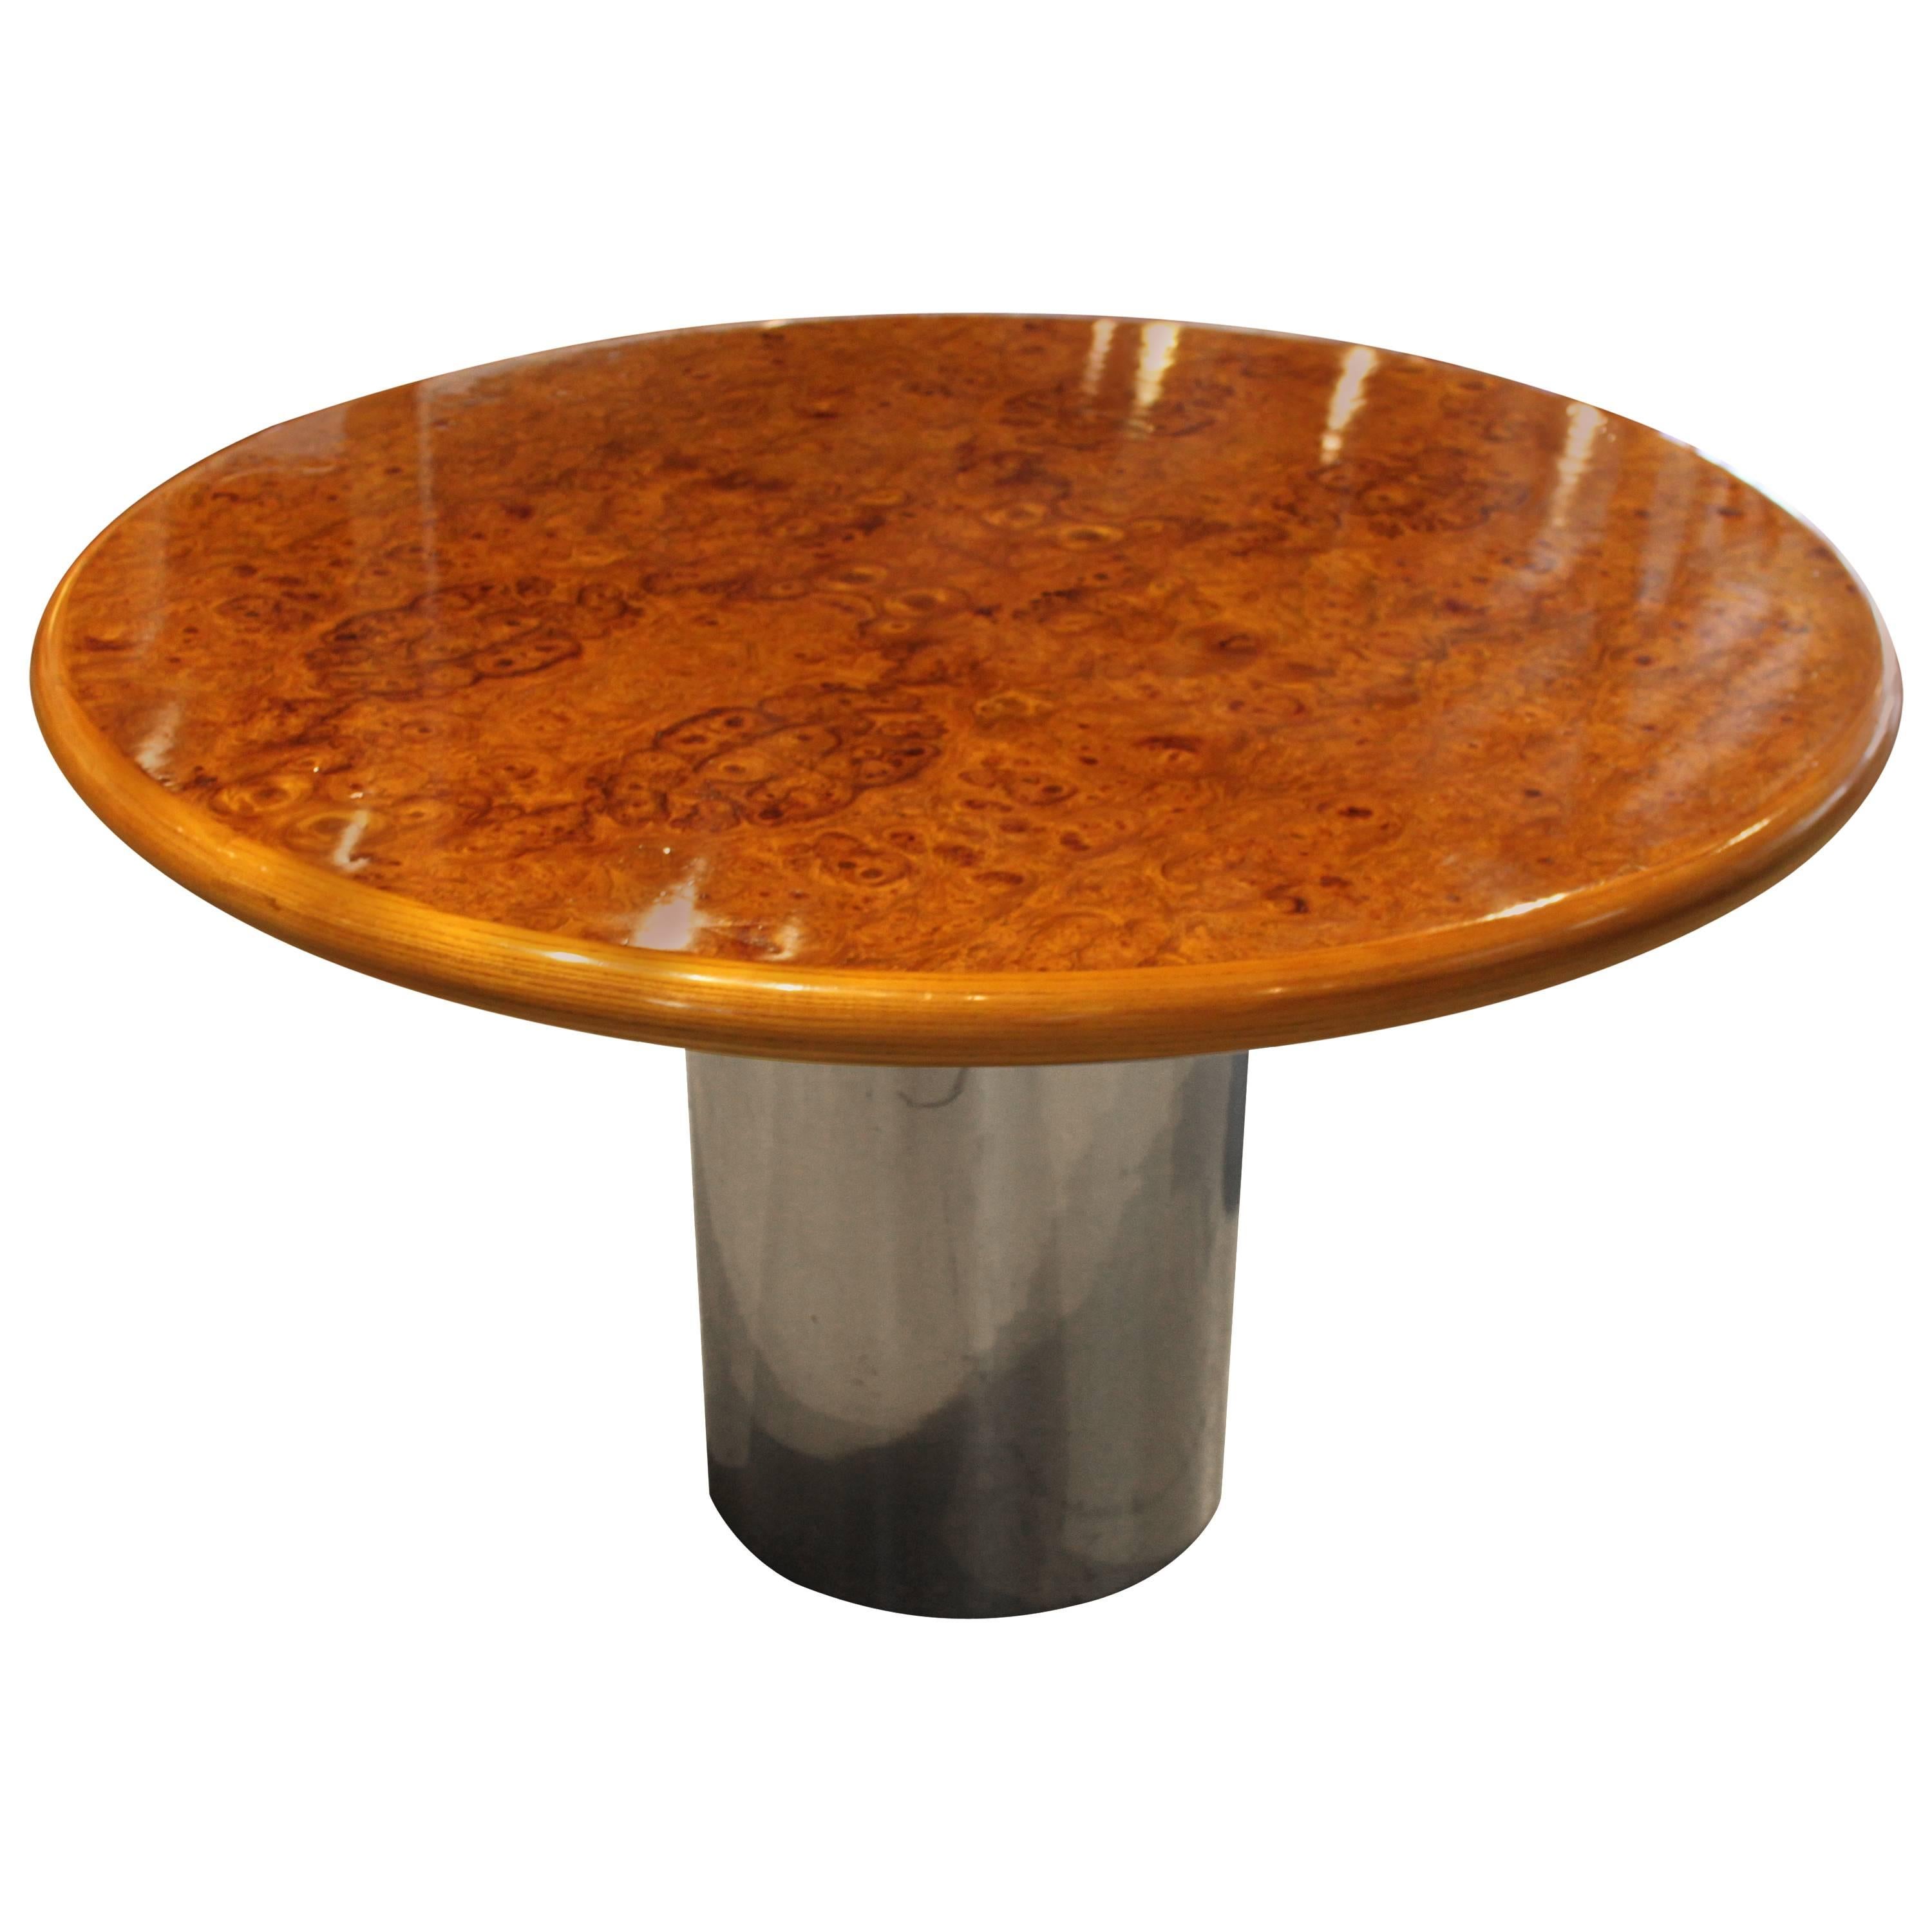 Gorgeous Burl Wood Center Table Attributed to Milo Baughman